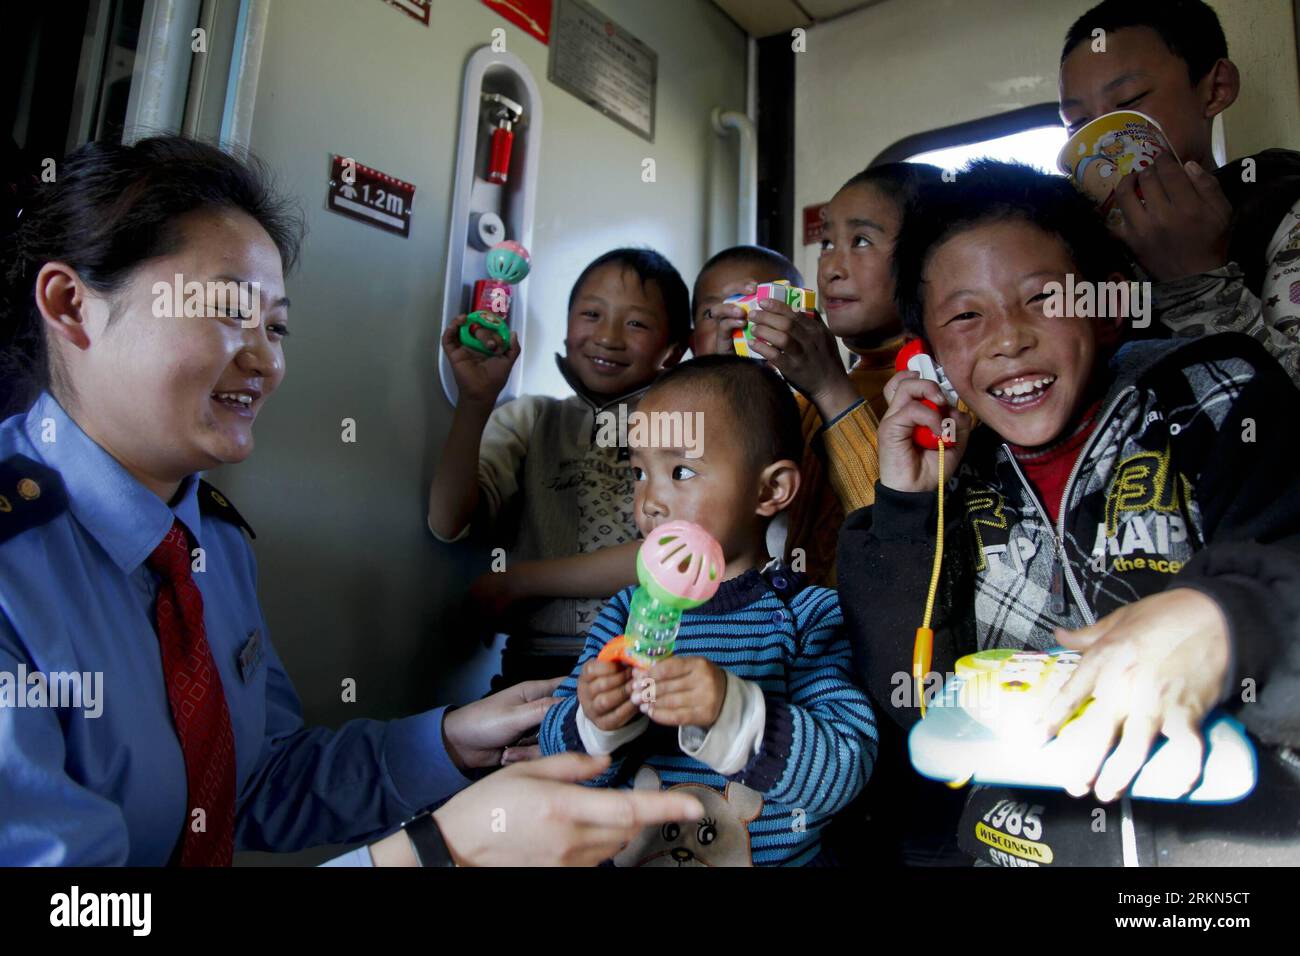 Bildnummer: 56986225  Datum: 30.01.2012  Copyright: imago/Xinhua (120130) -- XINING, Jan. 30, 2012 (Xinhua) -- A conductor gives children toys at a train that runs on the Qinghai-Tibet railway in southwest China s Qinghai Province, Jan. 29, 2012. The Qinghai-Tibet Railway Company carried out 20 new services as the number of passengers rises after the Spring Festival holiday. The new services includes providing poker cards, chess, toys and so on for passengers. (Xinhua/Wu Gang) (zhs) CHINA-XINING-RAILWAY-SERVICE (CN) PUBLICATIONxNOTxINxCHN Gesellschaft Bahn Verkehr Kind Betreuung Zugbegleiter x Stock Photo